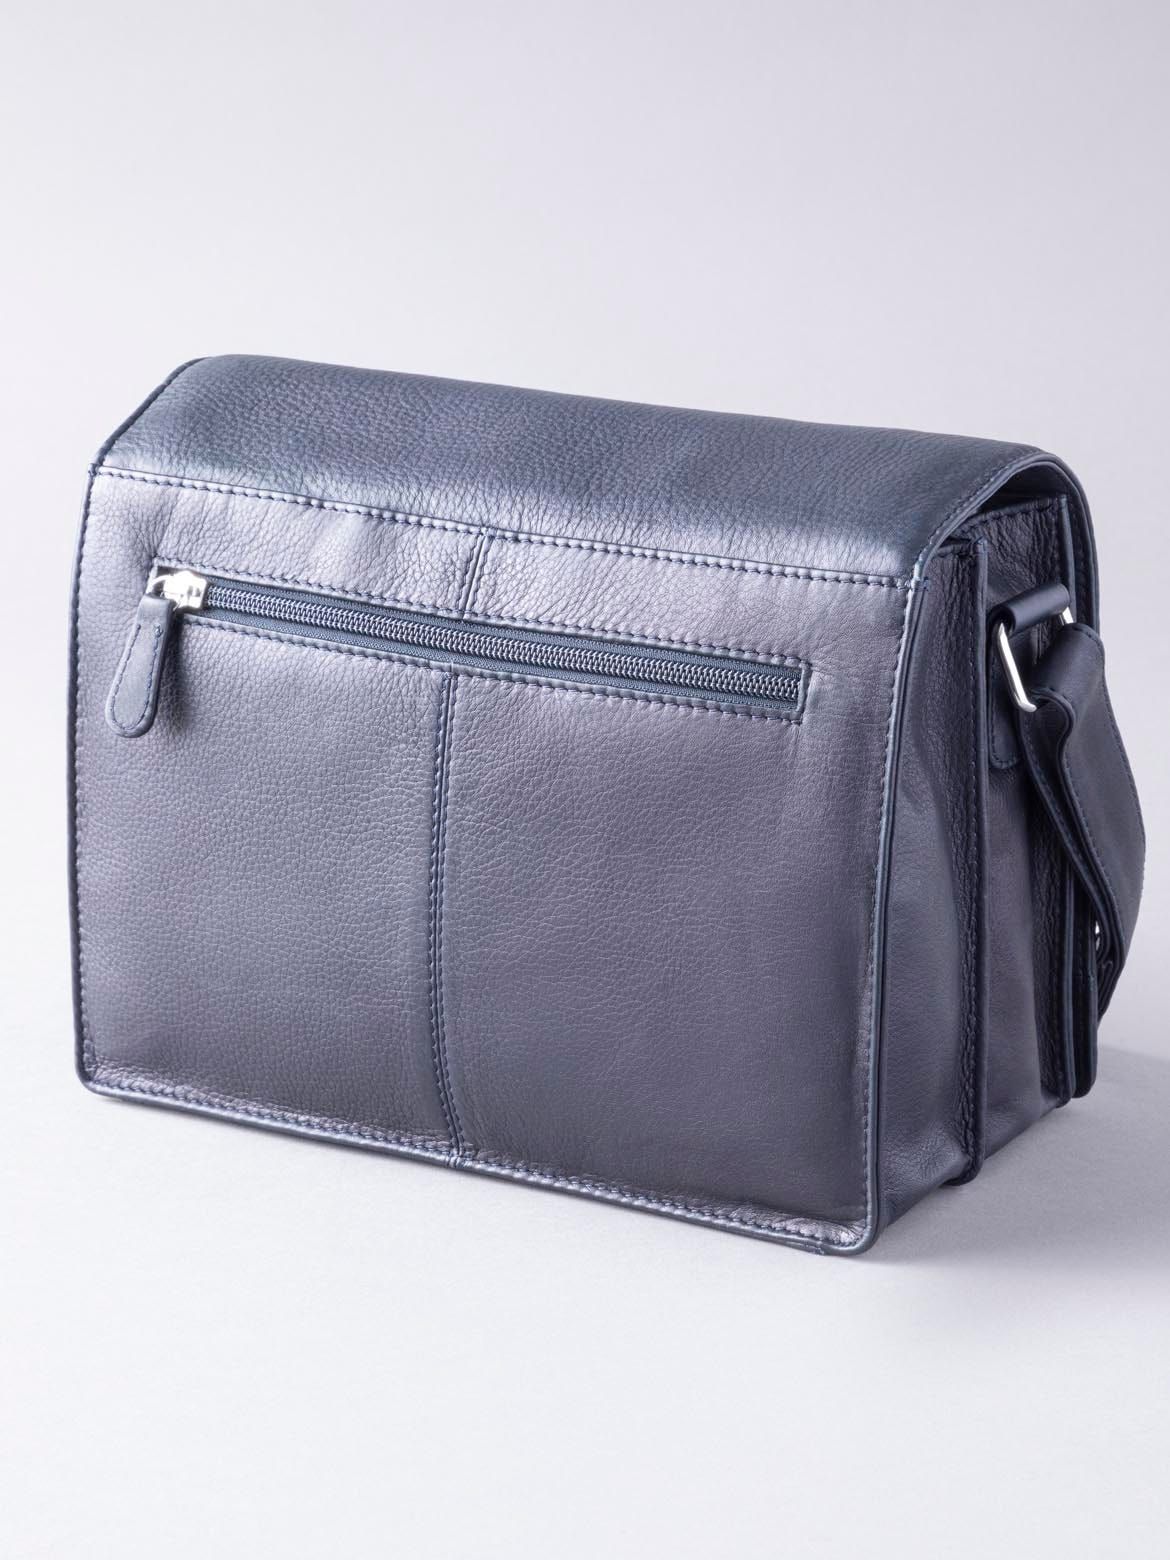 Elegant on the outside and hardworking on the inside, the Ennerdale Leather Organiser Bag in Navy is the perfect work week companion. Embrace this practical yet stylish bag, with pockets for everything from your phone to your cards, and large central compartments for near enough everything else, all neatly housed under the large flapover magnetic design. The long leather and fabric shoulder strap is ideal for slinging over the shoulder or carrying cross body. It's a bag made for business.